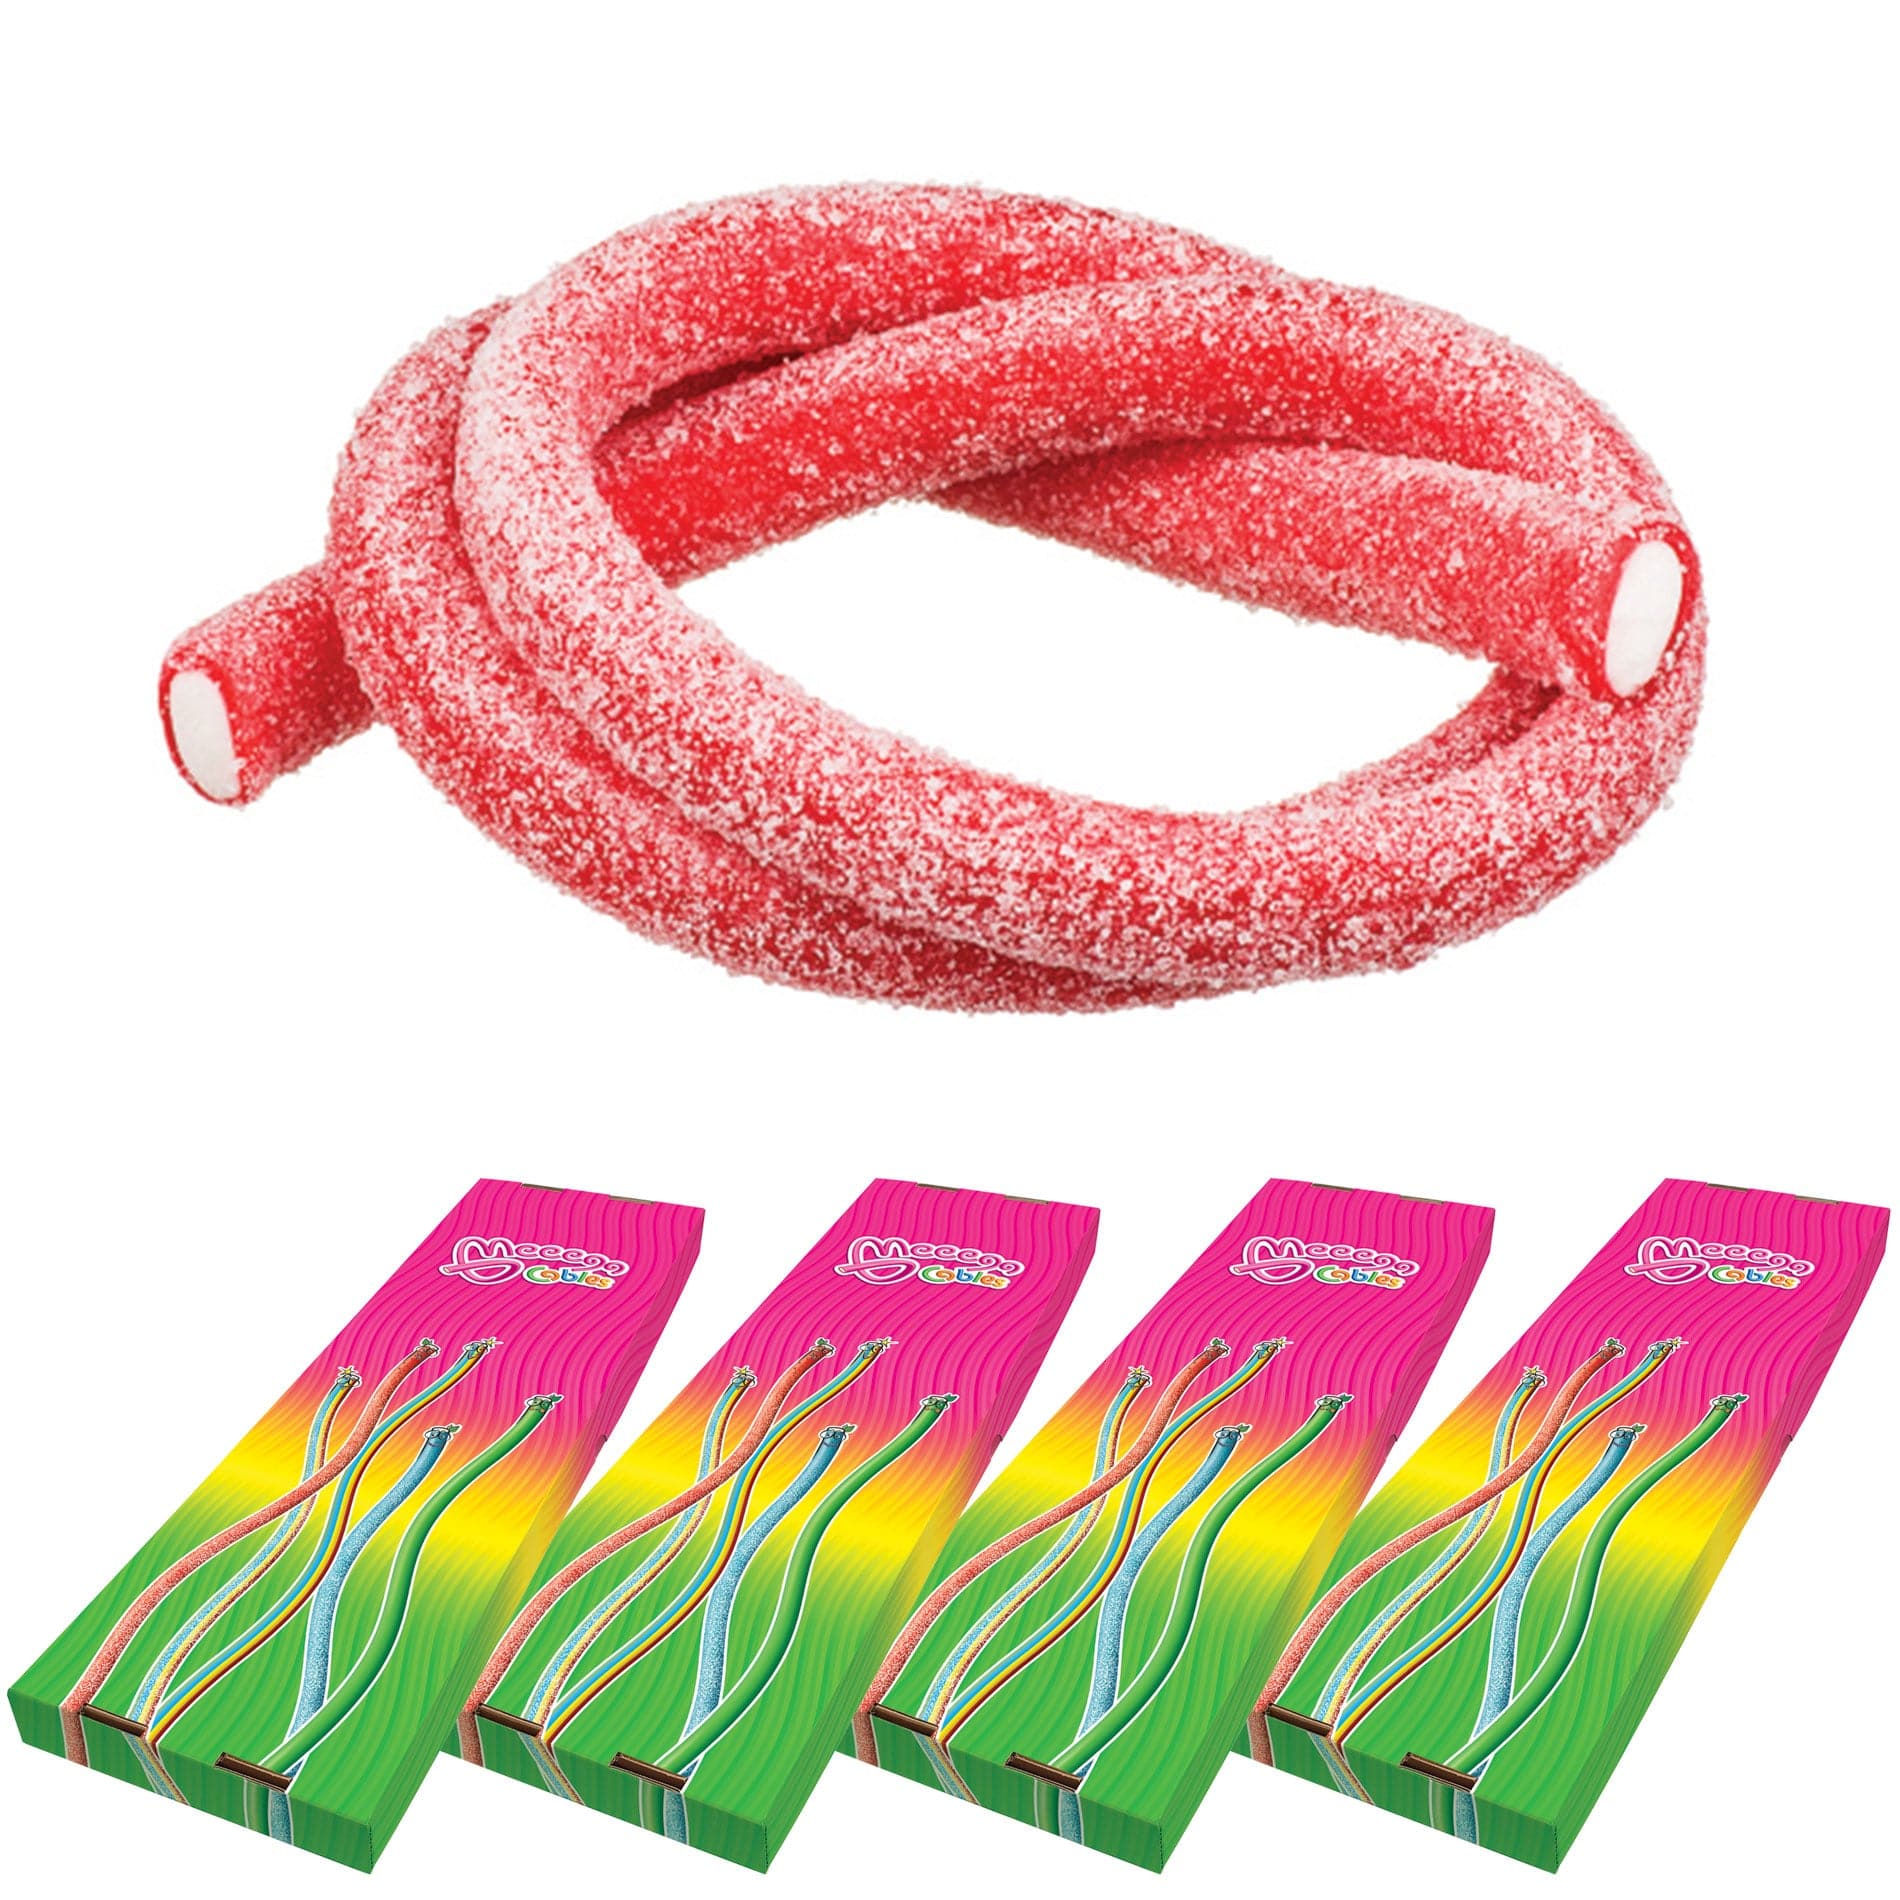 Novelty Concessions Gummy Rope SOUR STRAWBERRY / 4 Pack (120 pieces) Meeega Cables European Chewy Rope Candy - Box of 30 individually wrapped Meeega Cables, each over 2-feet long cups with lids and straws